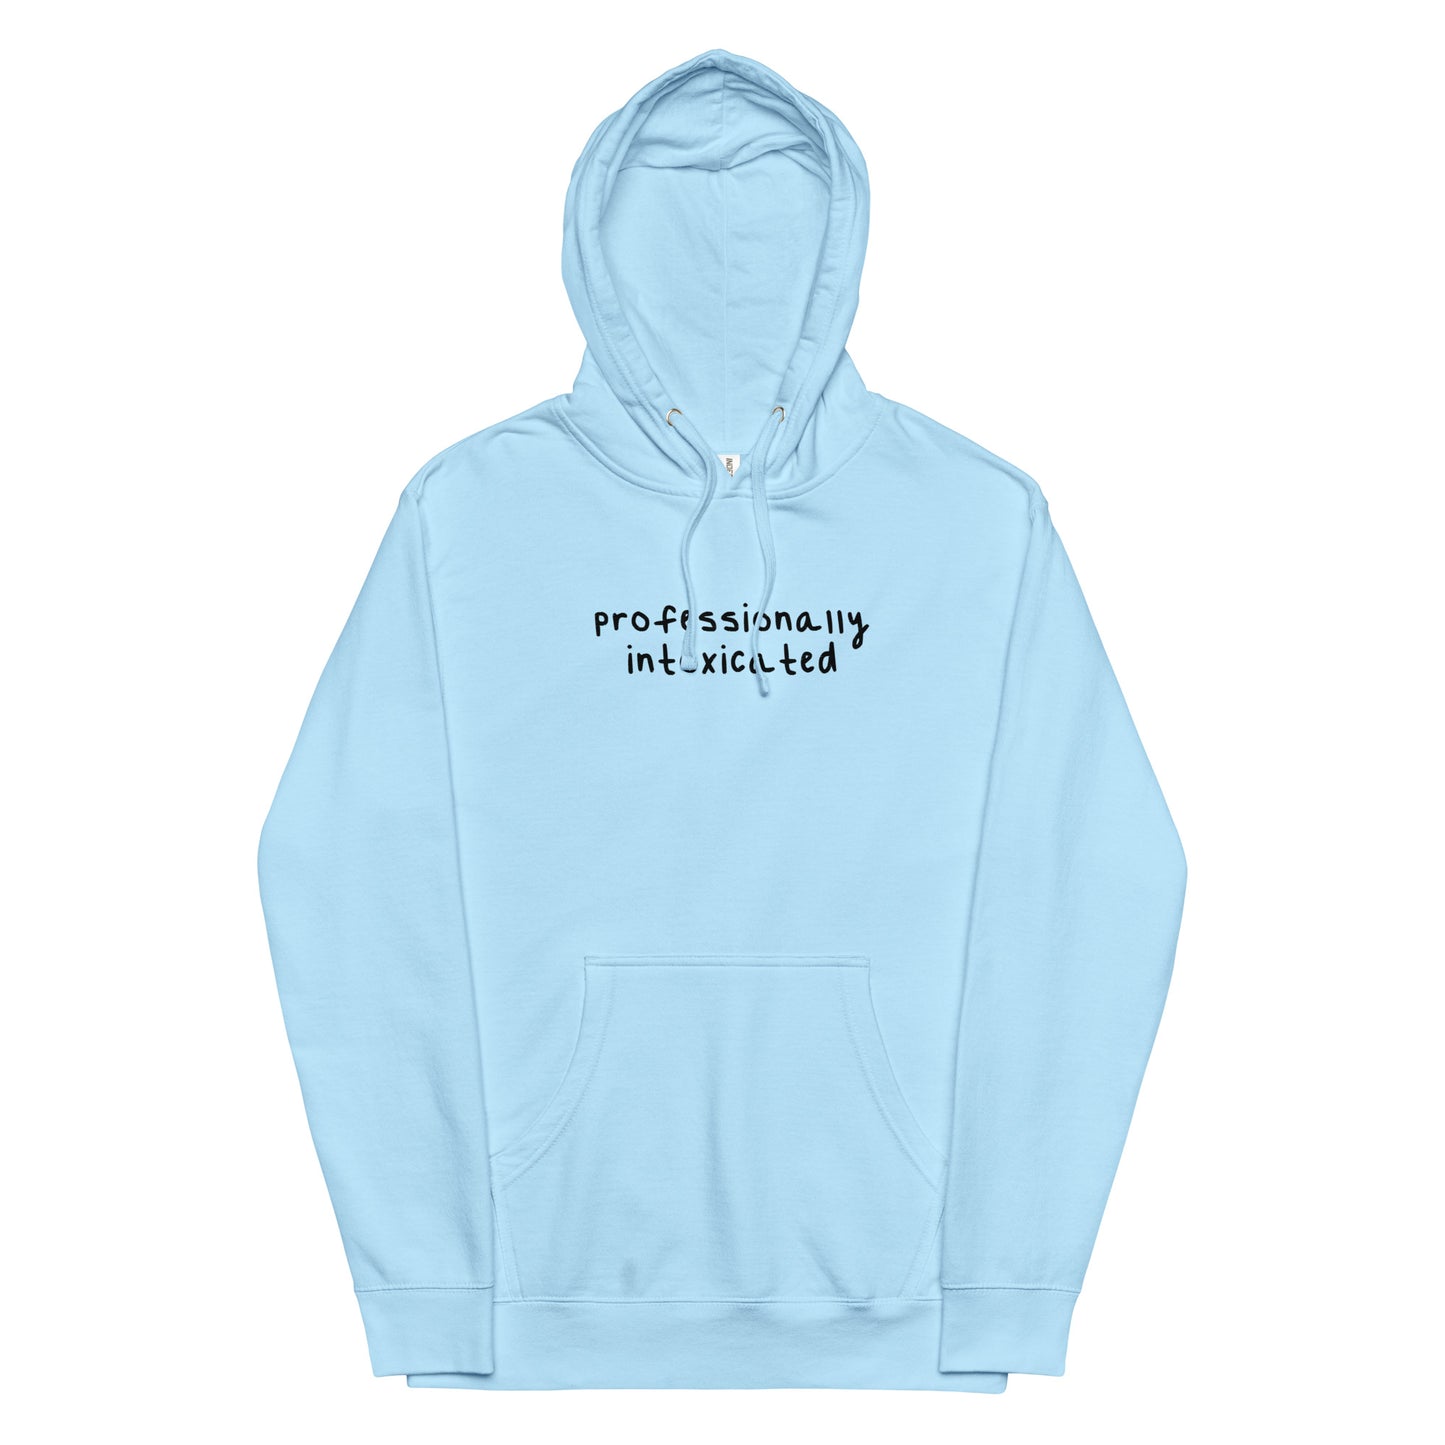 Professionally Intoxicated (Embroidered) Unisex hoodie